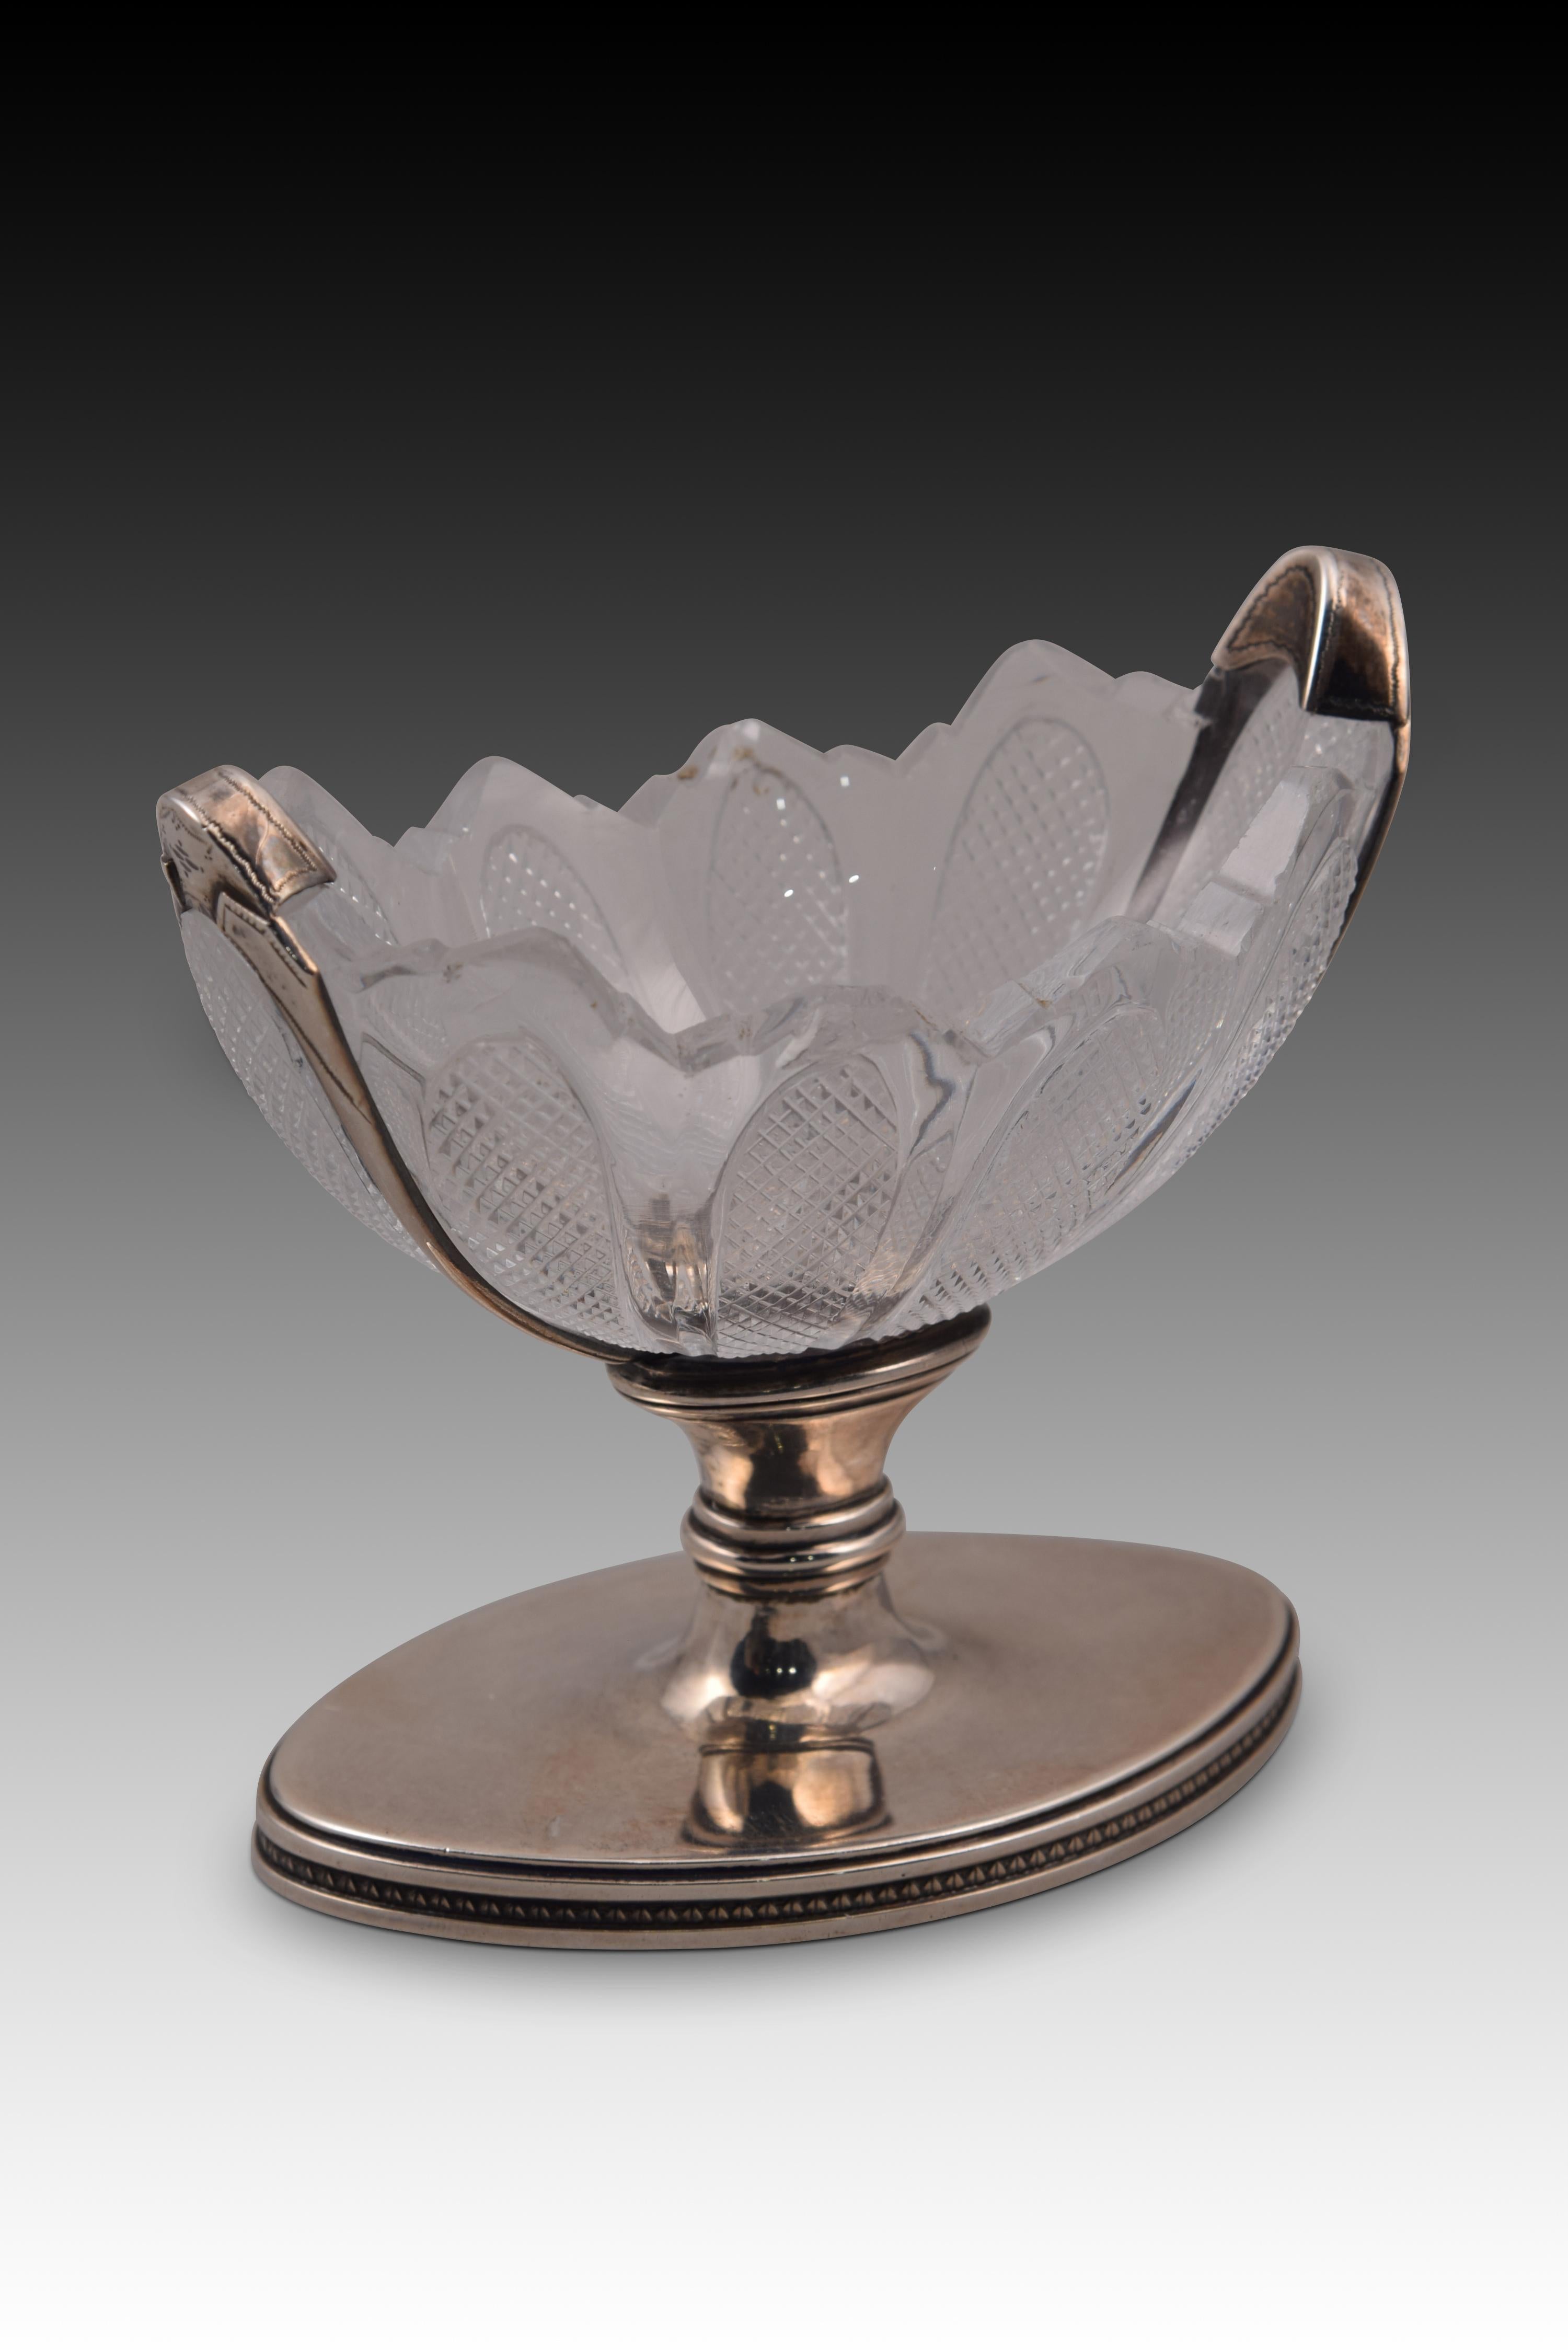 Spice rack. Silver and cut glass. XIX century. 
Spice rack with an oval base in silver in its color from which an outwardly curved axis emerges at the top and decorated towards the center with smooth moldings. Two bands depart from this axis, which